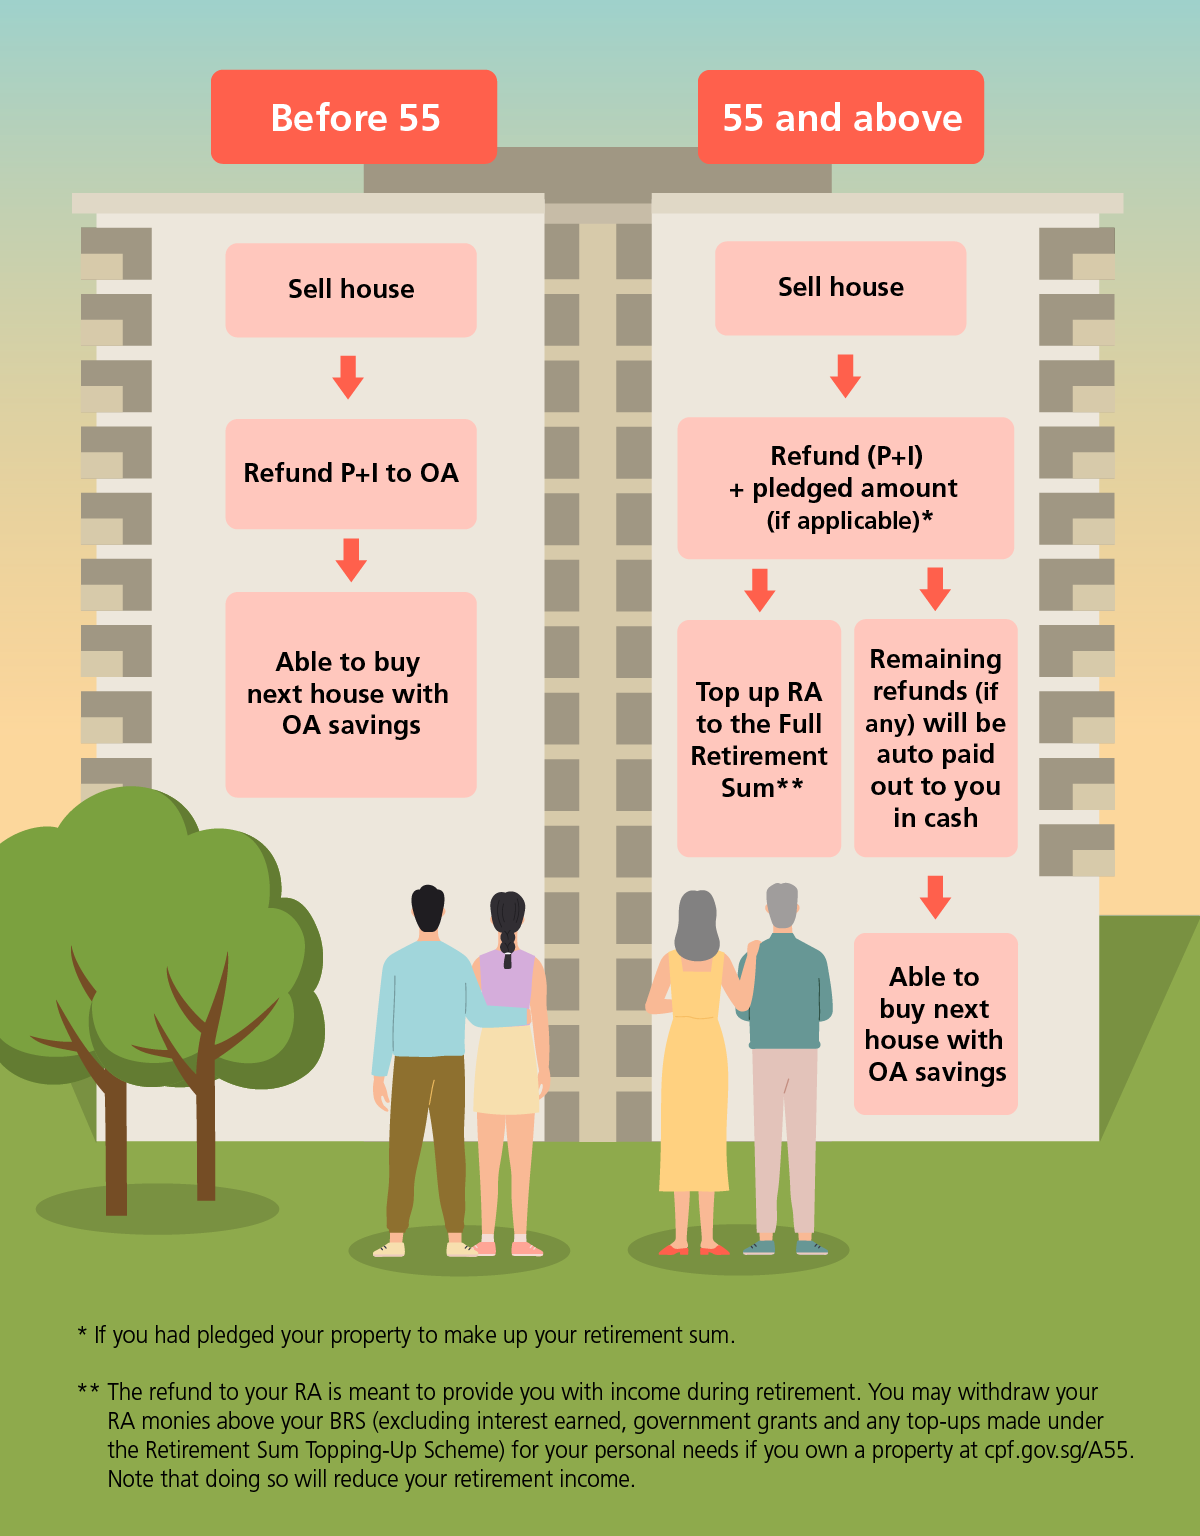 Sale of home after and before 55 infographic 